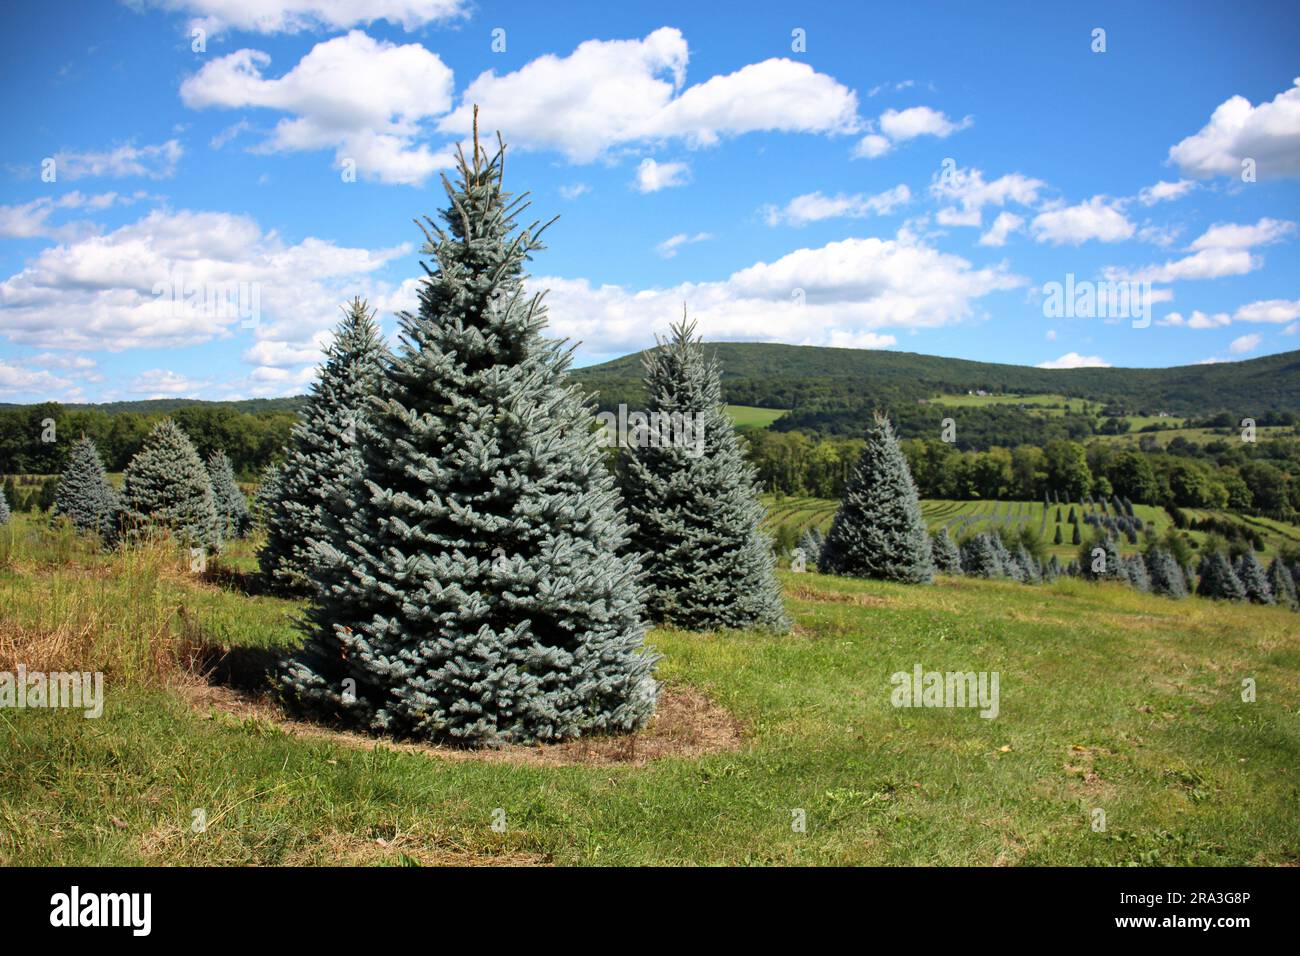 blue trees in row bright colors (green conifers spruce fir pine xmas tree farm) meadow blue sky clouds Stock Photo